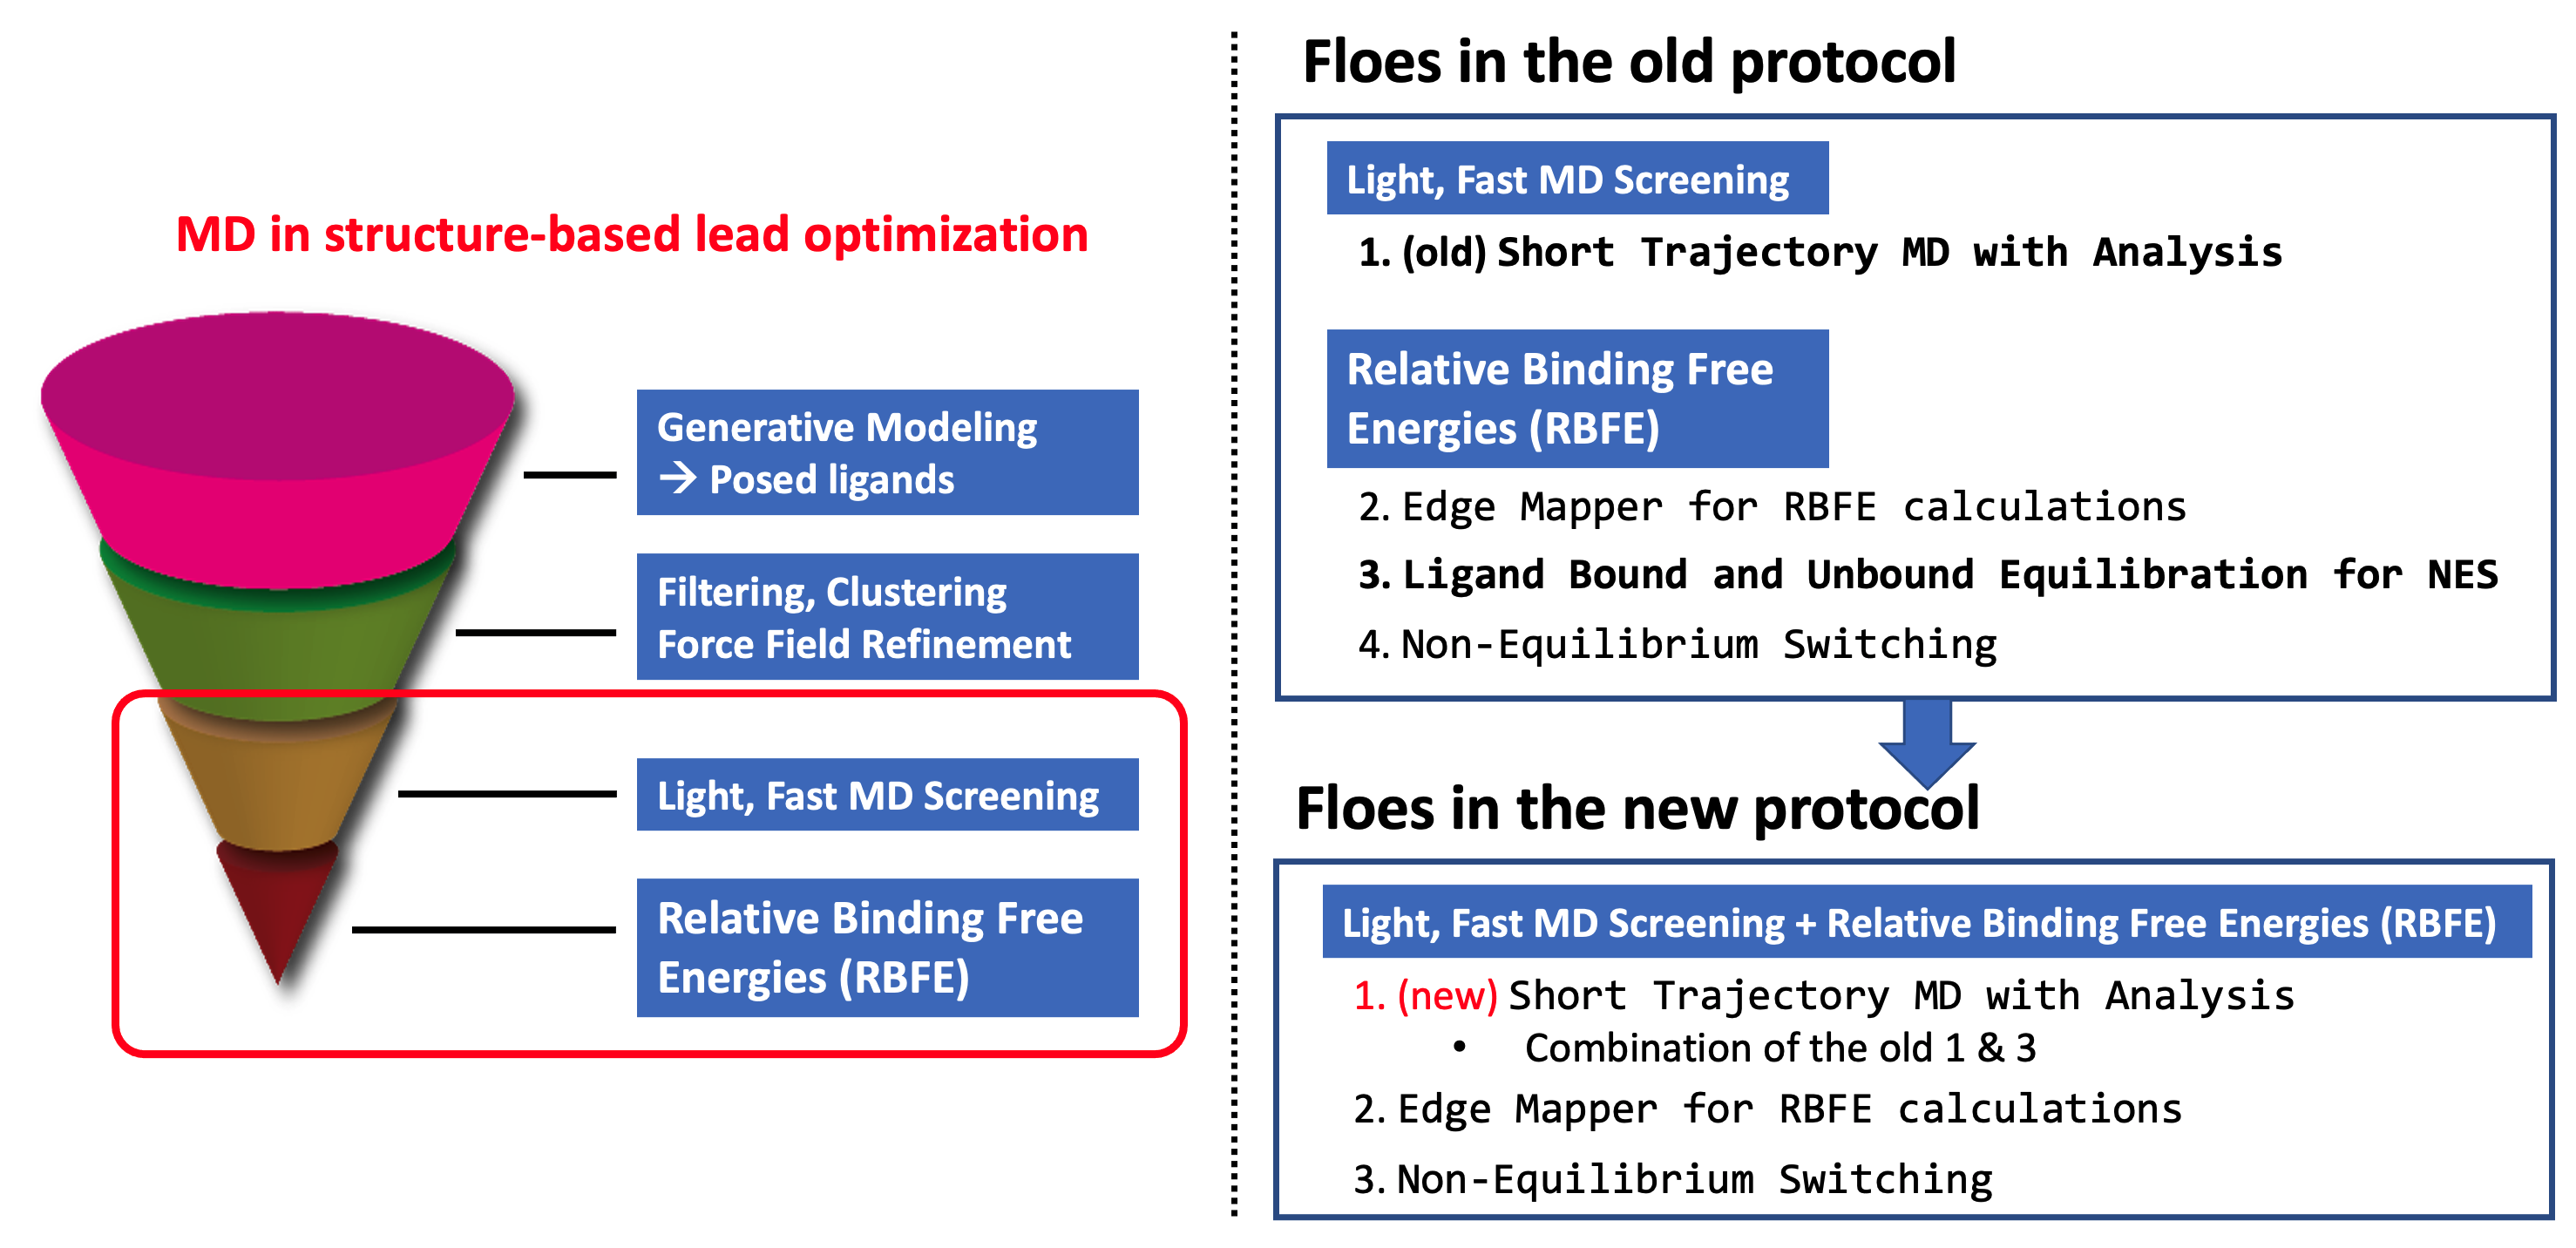 New Protocol of the MD Stage in Lead Optimization